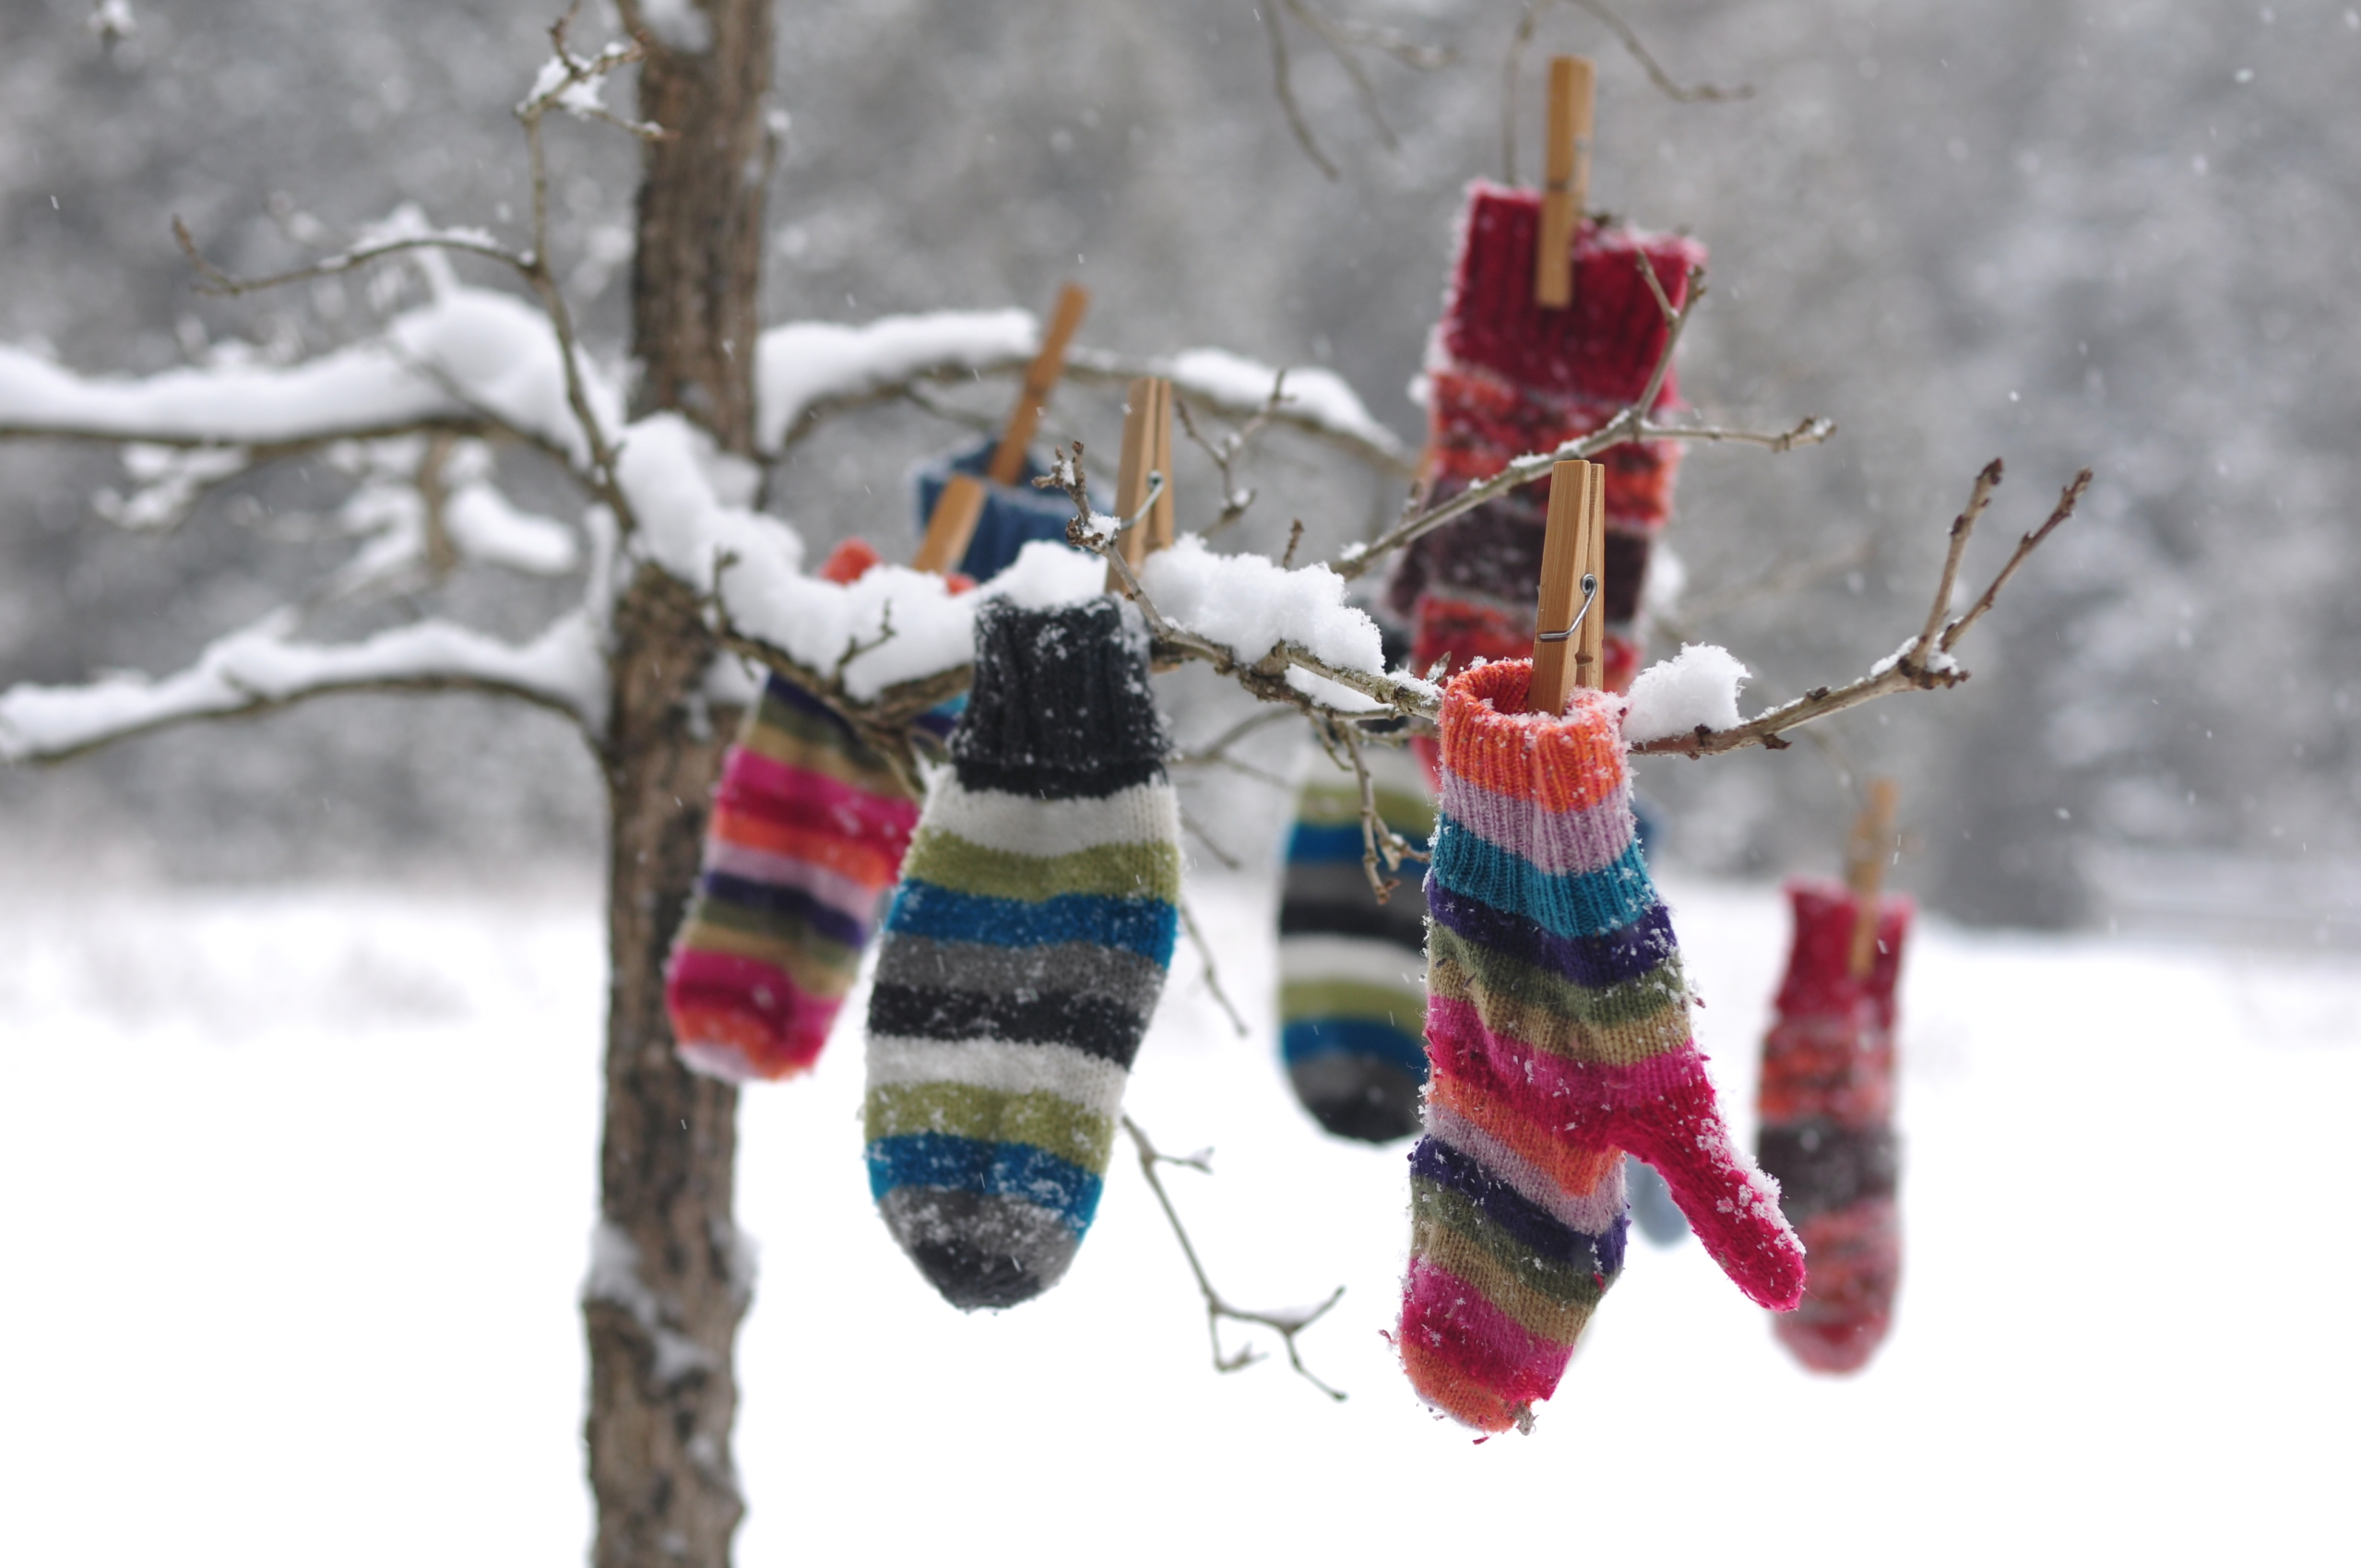 Striped knitted mittens clothes pinned to a snowy tree